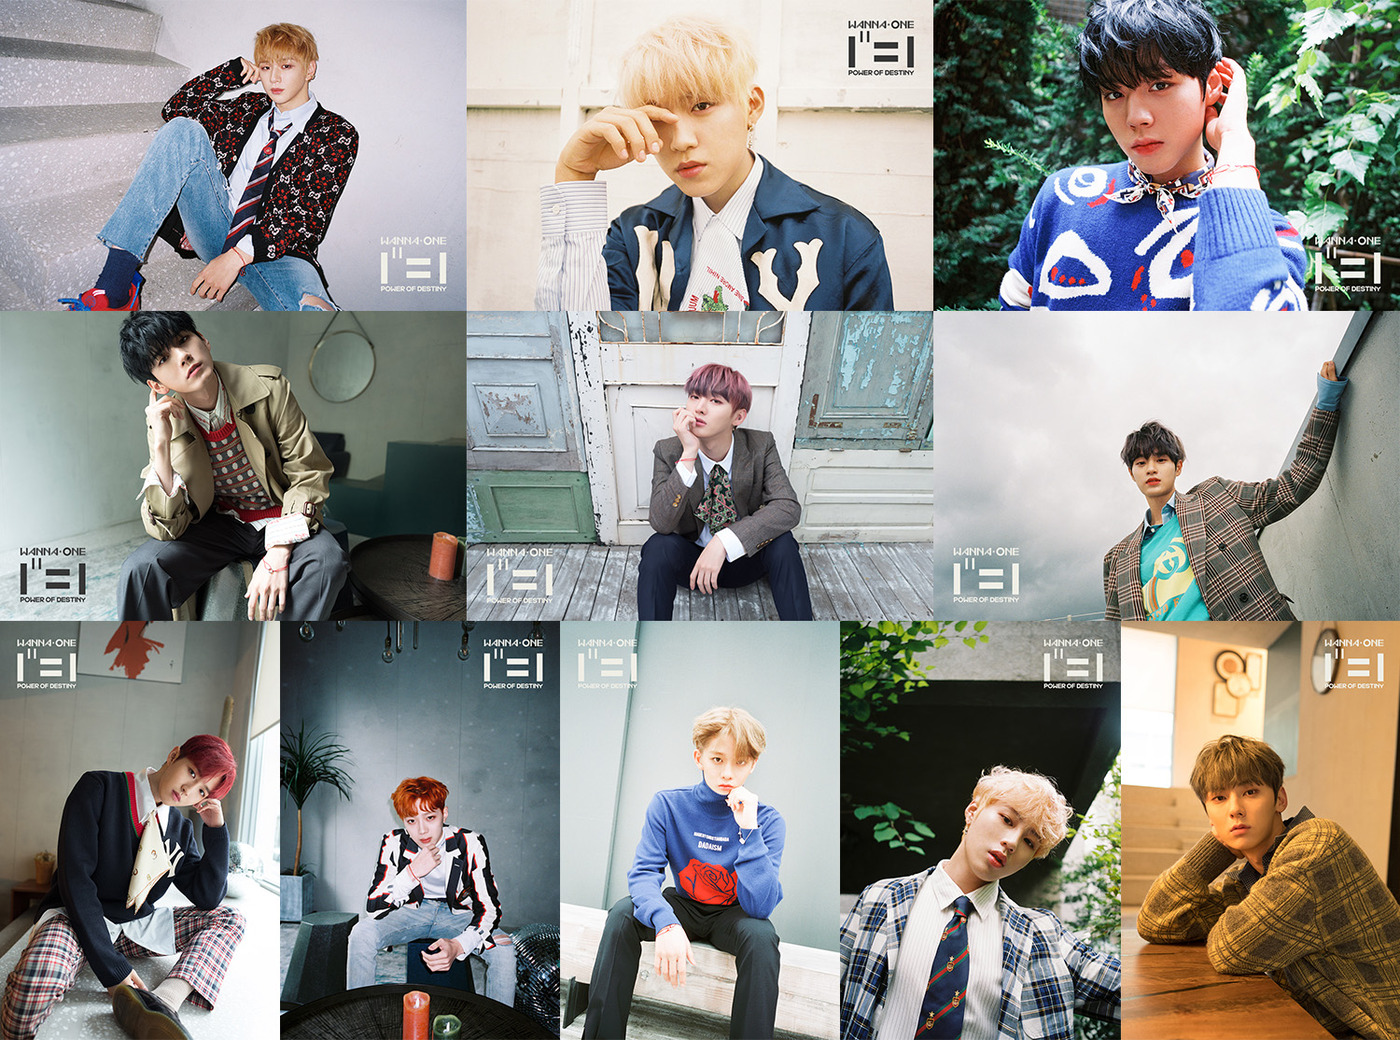 Wanna One released all of the romance version teaser Images of its first full-length album 111=1 (POWER OF DESTINY) through official SNS from the 9th to the 11th.Wanna Ones romance version teaser, which was released on November 11, has a charm that is 180 degrees different from the adventure teaser, which emits charisma and masculine beauty in the background of mysterious space.The members are attracted to the eyes by showing off the same warm visuals as the male protagonist of the romance drama, such as a colorful yet eye-catching tie, a dandy style jacket, a knit and a turtleneck with warm warmth.Through the group Image, the members who showed a warm and warm aspect were in perfect harmony and combined to further raise expectations for Wanna One to come back with the Spring Wind.111=1 (POWER OF DESTINY), which will be released on the 19th, is Wanna Ones first Music album, which is shaped by the formula 111=1, which was the will to pioneer the fate given by Wanna One, who has shown the arithmetic series such as 1x=1, 0+1=1, 1-1=0 and 1X1=1.The title song Spring Wind is a song that contains the fate (DESTINY) that you and I have missed each other as one, but the will to meet again and become one again against the fate, and it is expected to show the musicality of Wanna One which has grown even more.Wanna One held its long-awaited world tour ONE: WORLD in June, where it met fans in 14 cities around World for three months and painted World with Wanna Ones Golden Age, and confirmed its comeback on the 19th, which has steadily spurred preparations for the new album.Wanna One has gained its highest popularity by releasing its debut album 1X1=1 (TO BE ONE), prequel repackage 1-1=0 (NOTHING WITHOUT YOU) and its second mini album 0+1=1 (I PROMISE YOU) in succession.In addition, he won the first prize on the music charts, 10 music broadcasts, as well as various year-end awards ceremony, and made his presence imprint. He also formed a unit of four teams through his special album 1=1 (UNDIVIDED) to show new charm and growth potential.Wanna Ones first full-length album, 111=1 (POWER OF DESTINY), will be released on the 19th.